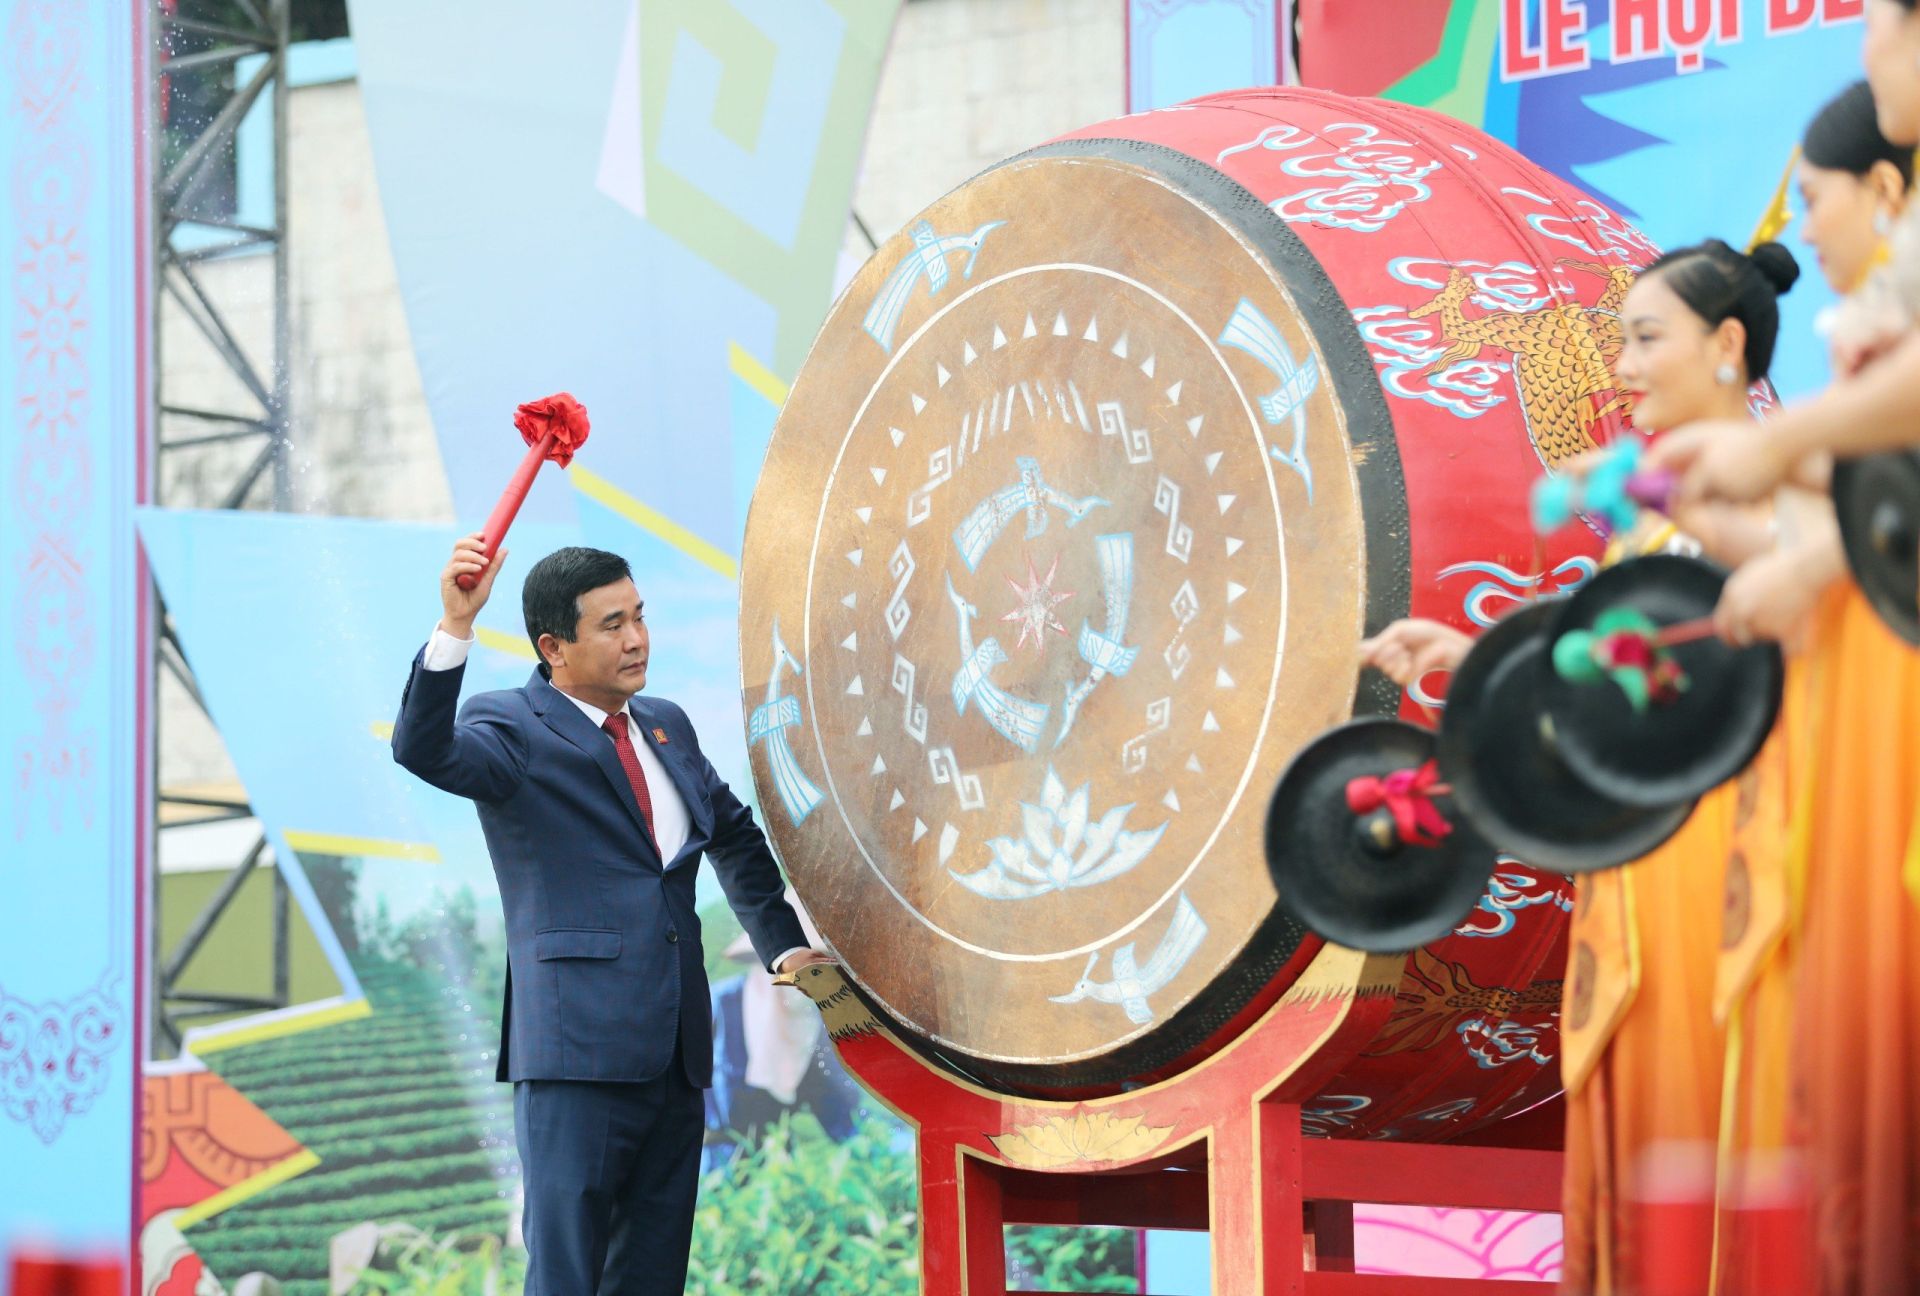 Mr Ho Dai Dung - Vice Chairman of the Provincial People’s Committee, and Head of the Organizing Committee for the Hung Kings’ Anniversary - Hung Temple Festival, beat the drum to open the ceremony